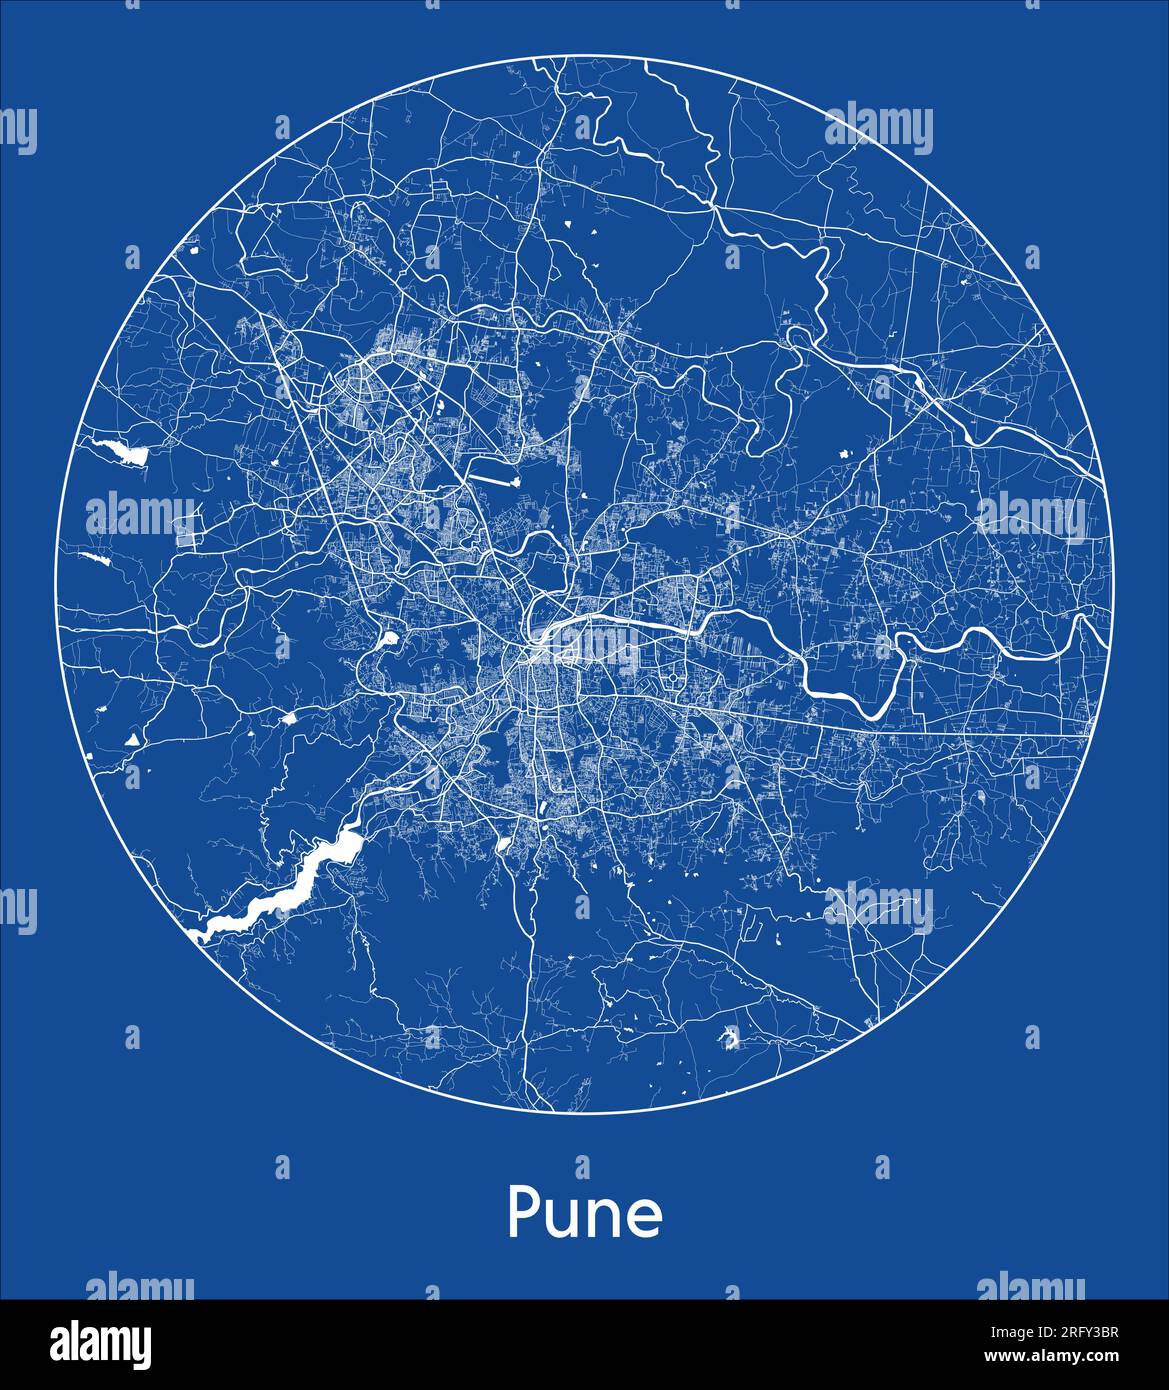 City Map Pune India Asia blue print round Circle vector illustration Stock Vector